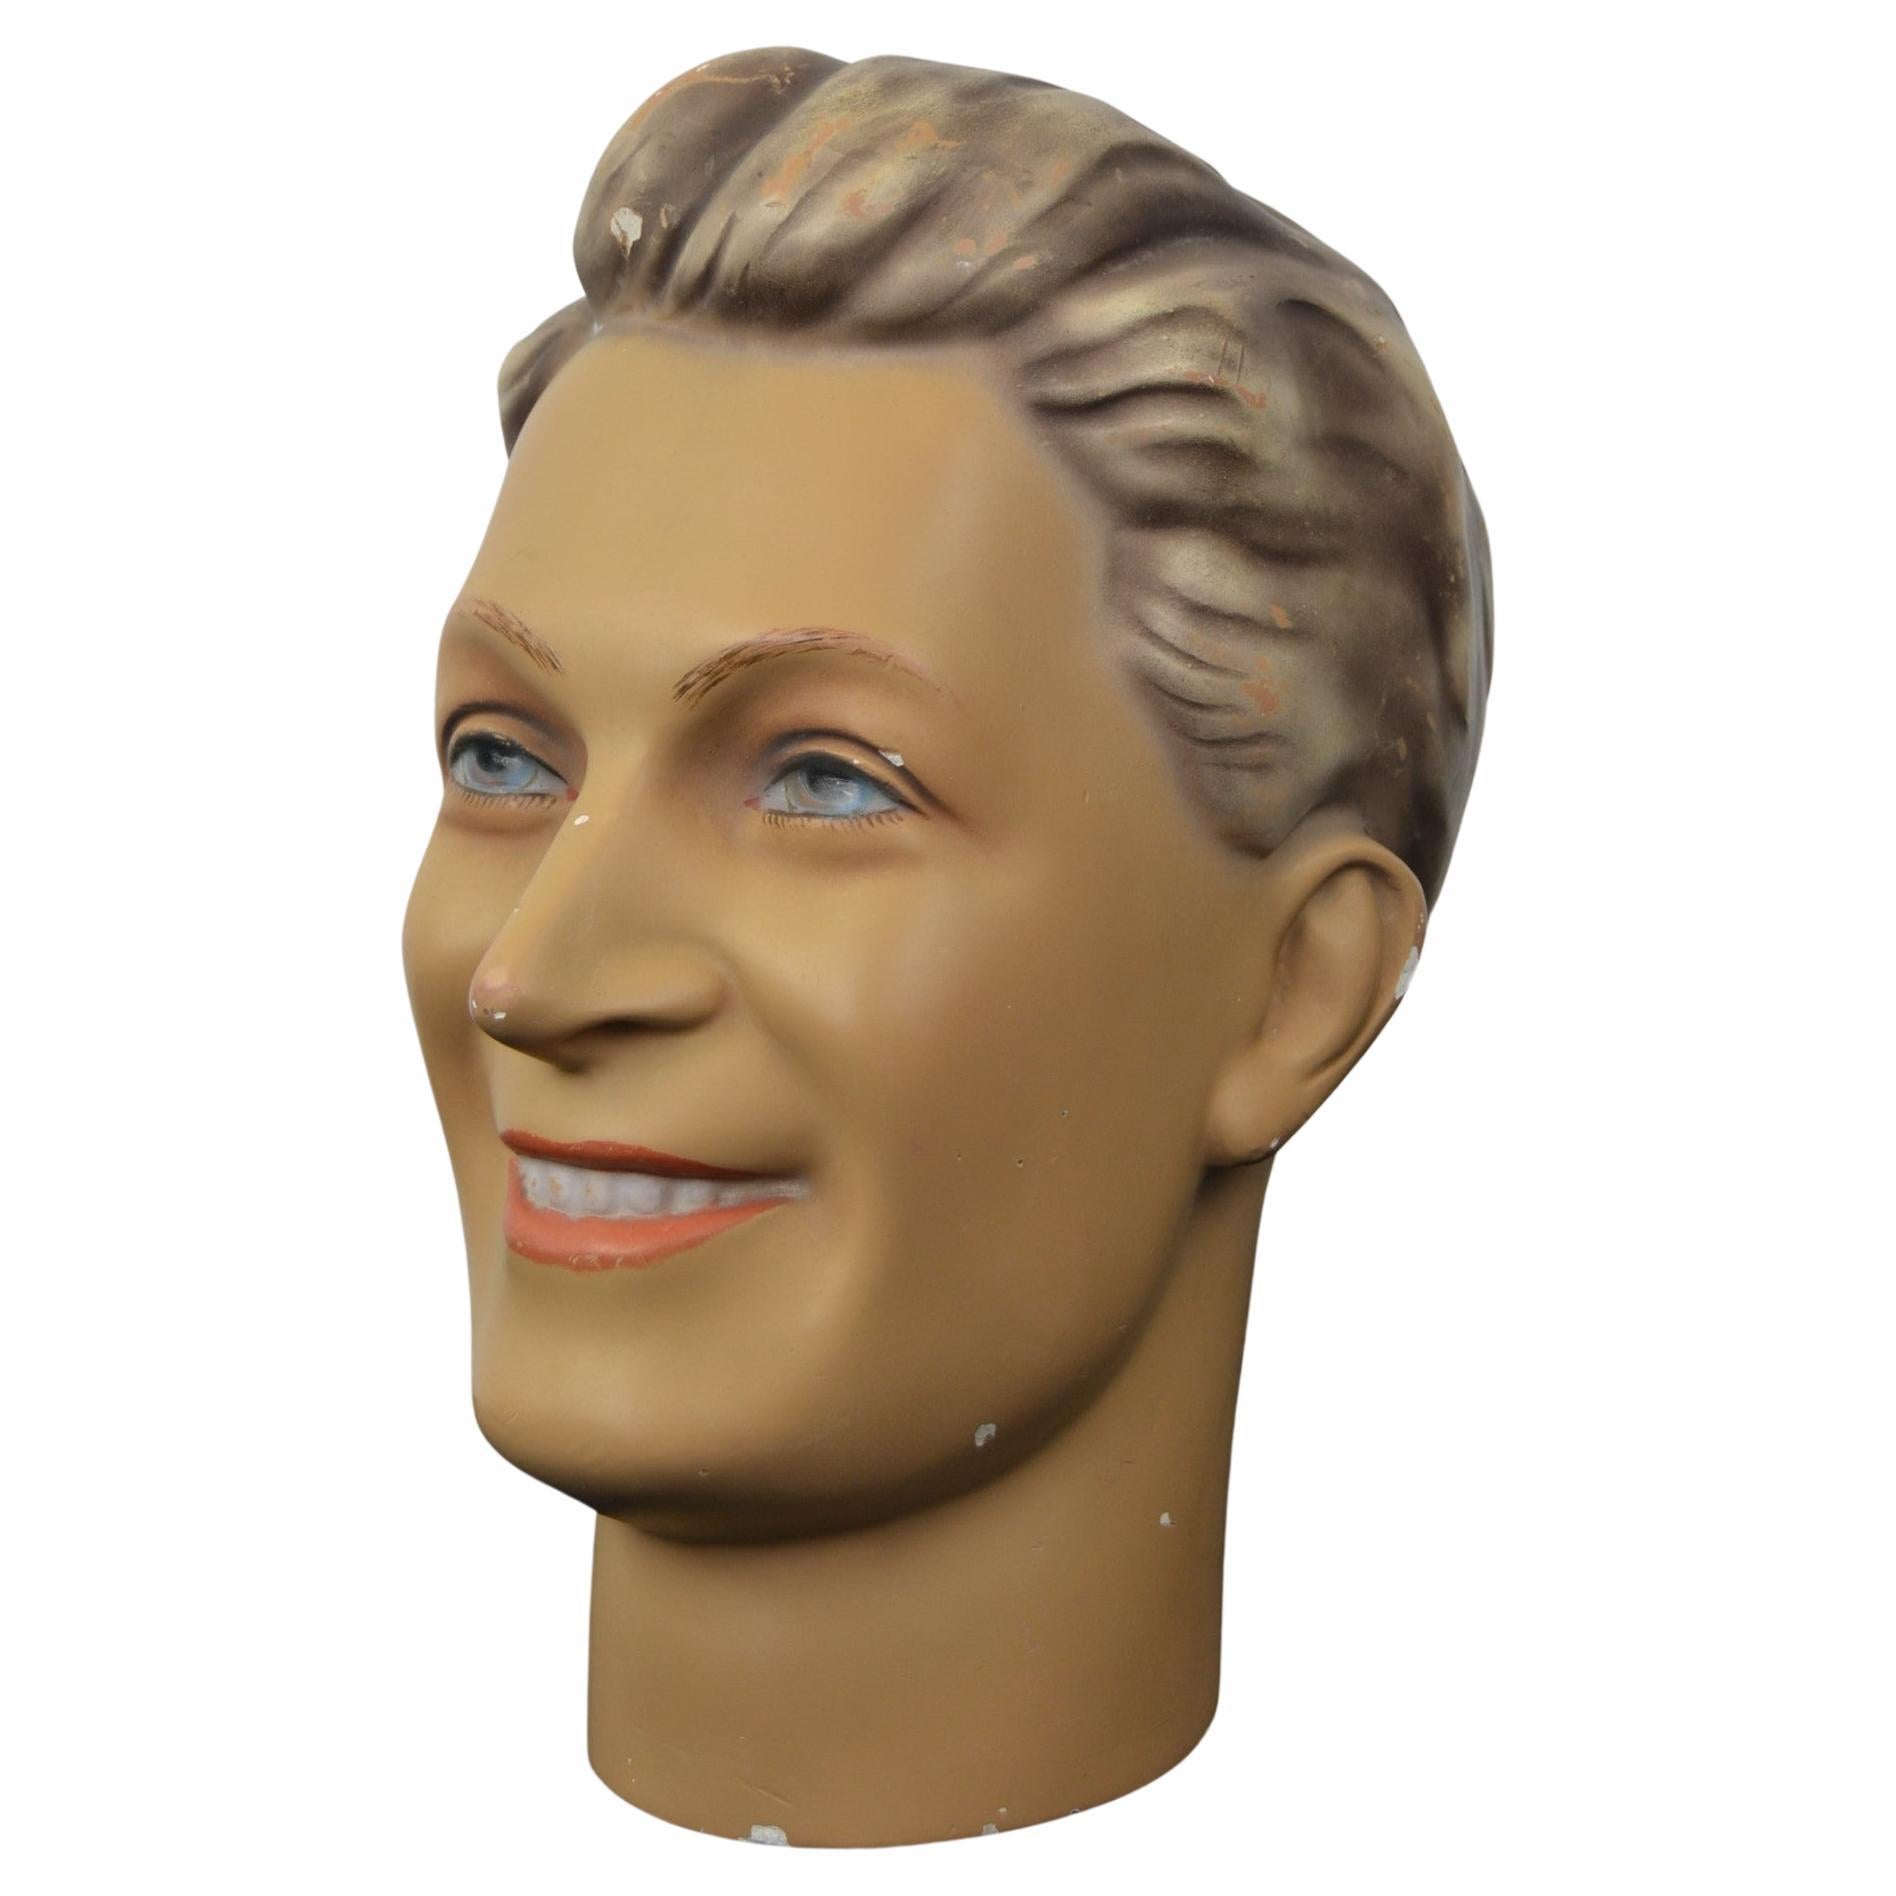 Plaster Male Mannequin Head with Blue Eyes For Sale